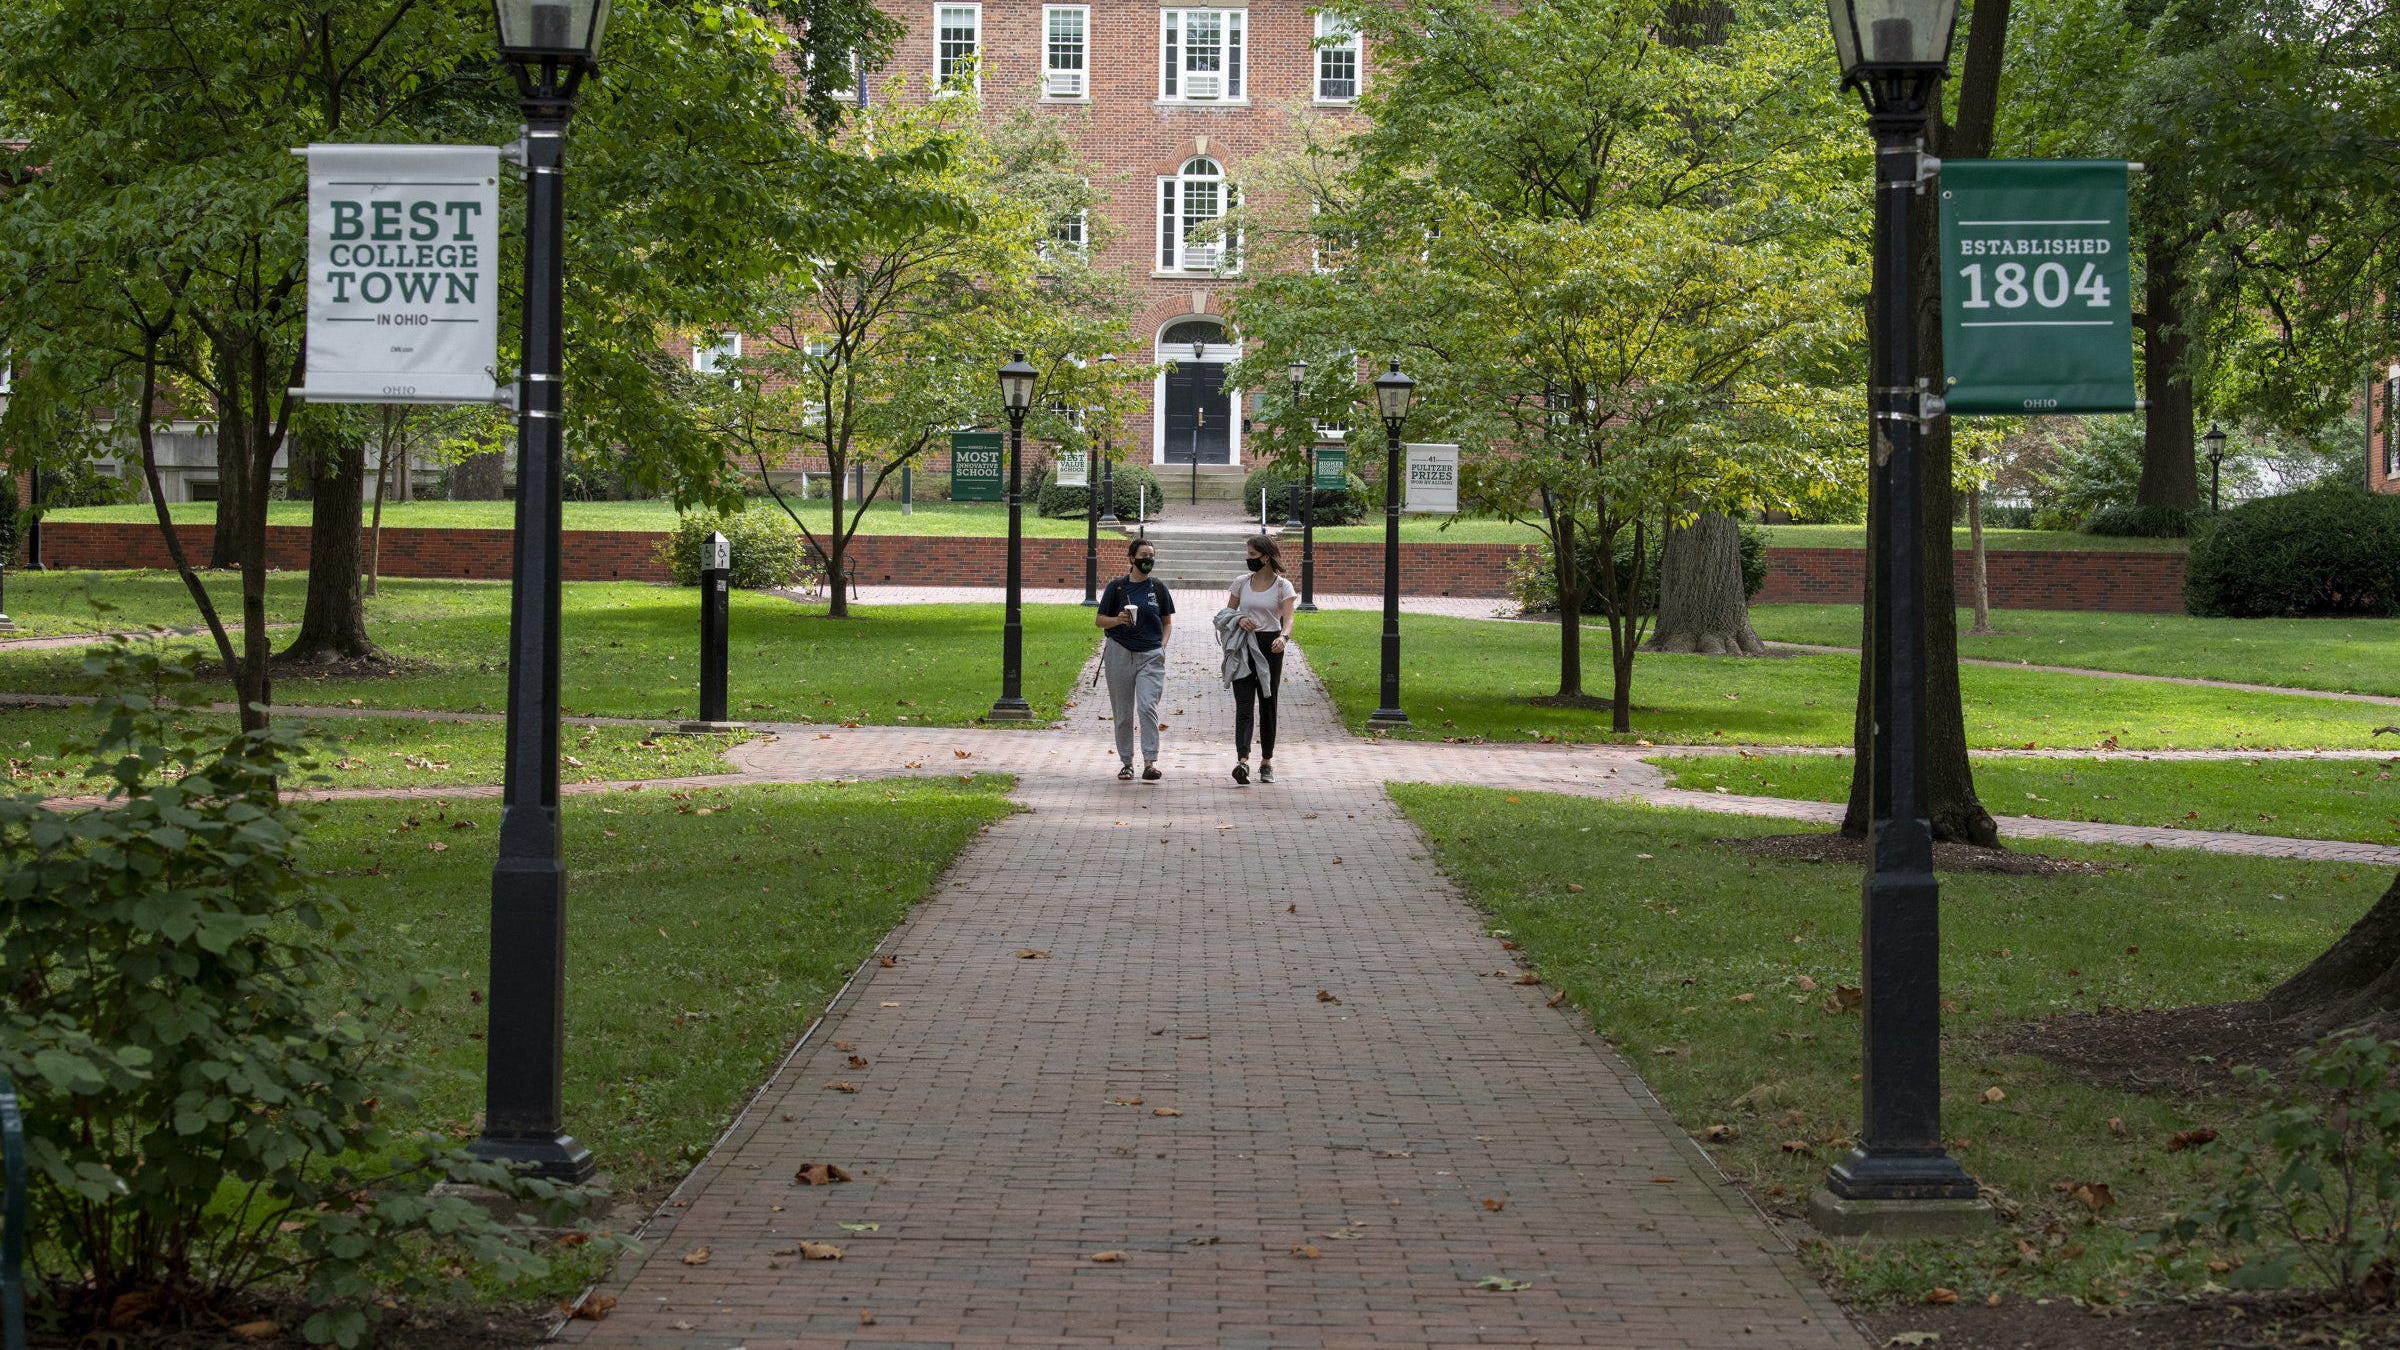 best colleges for c students 2020